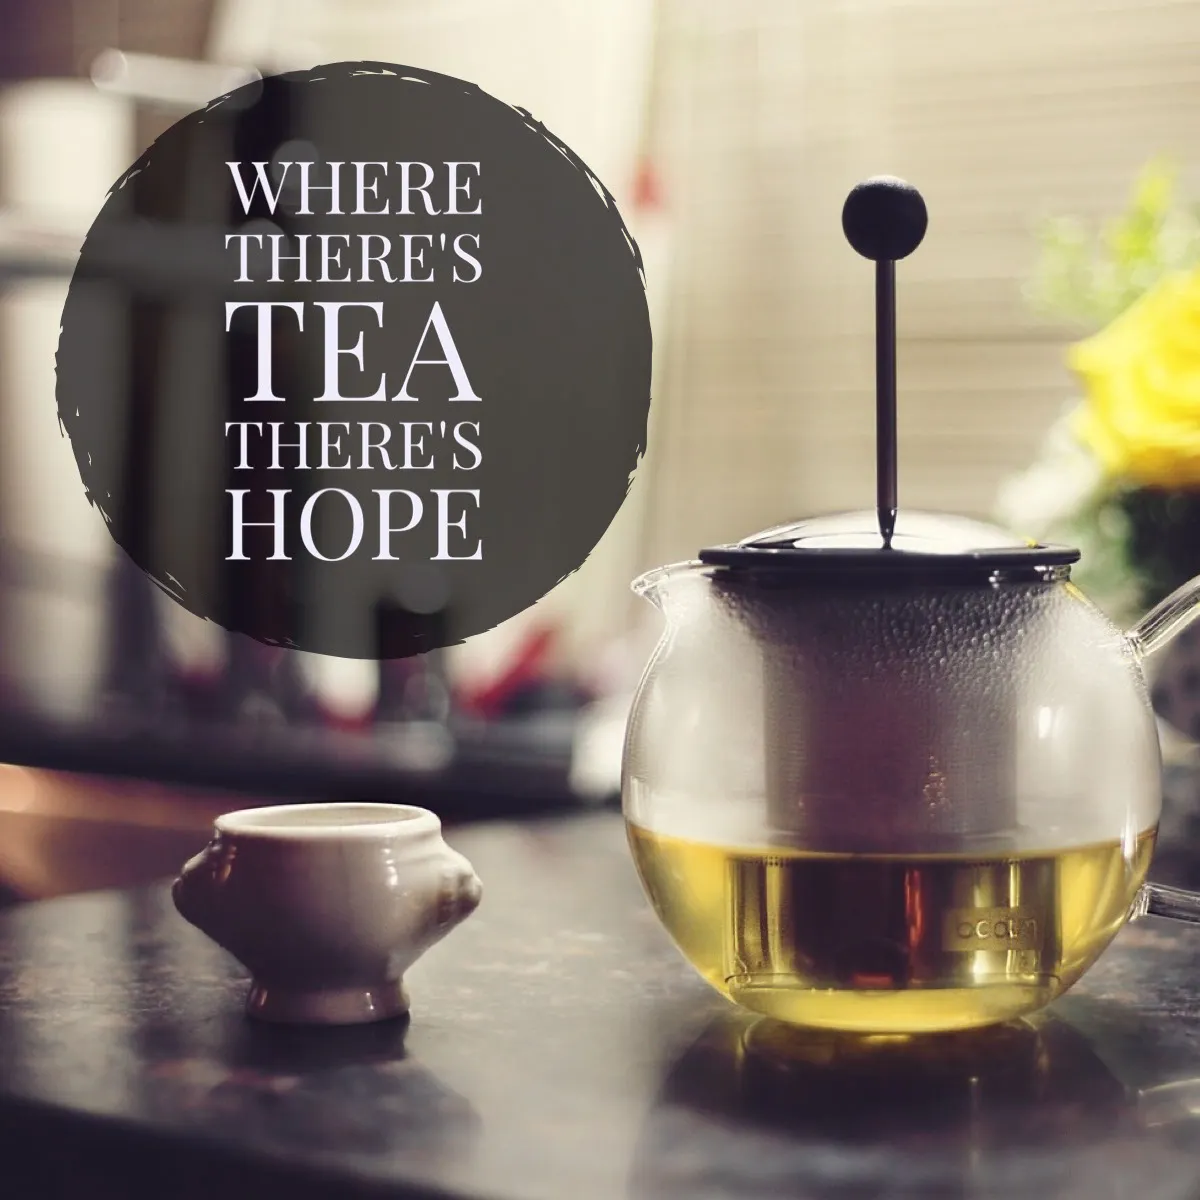 Where there's Tea there's Hope